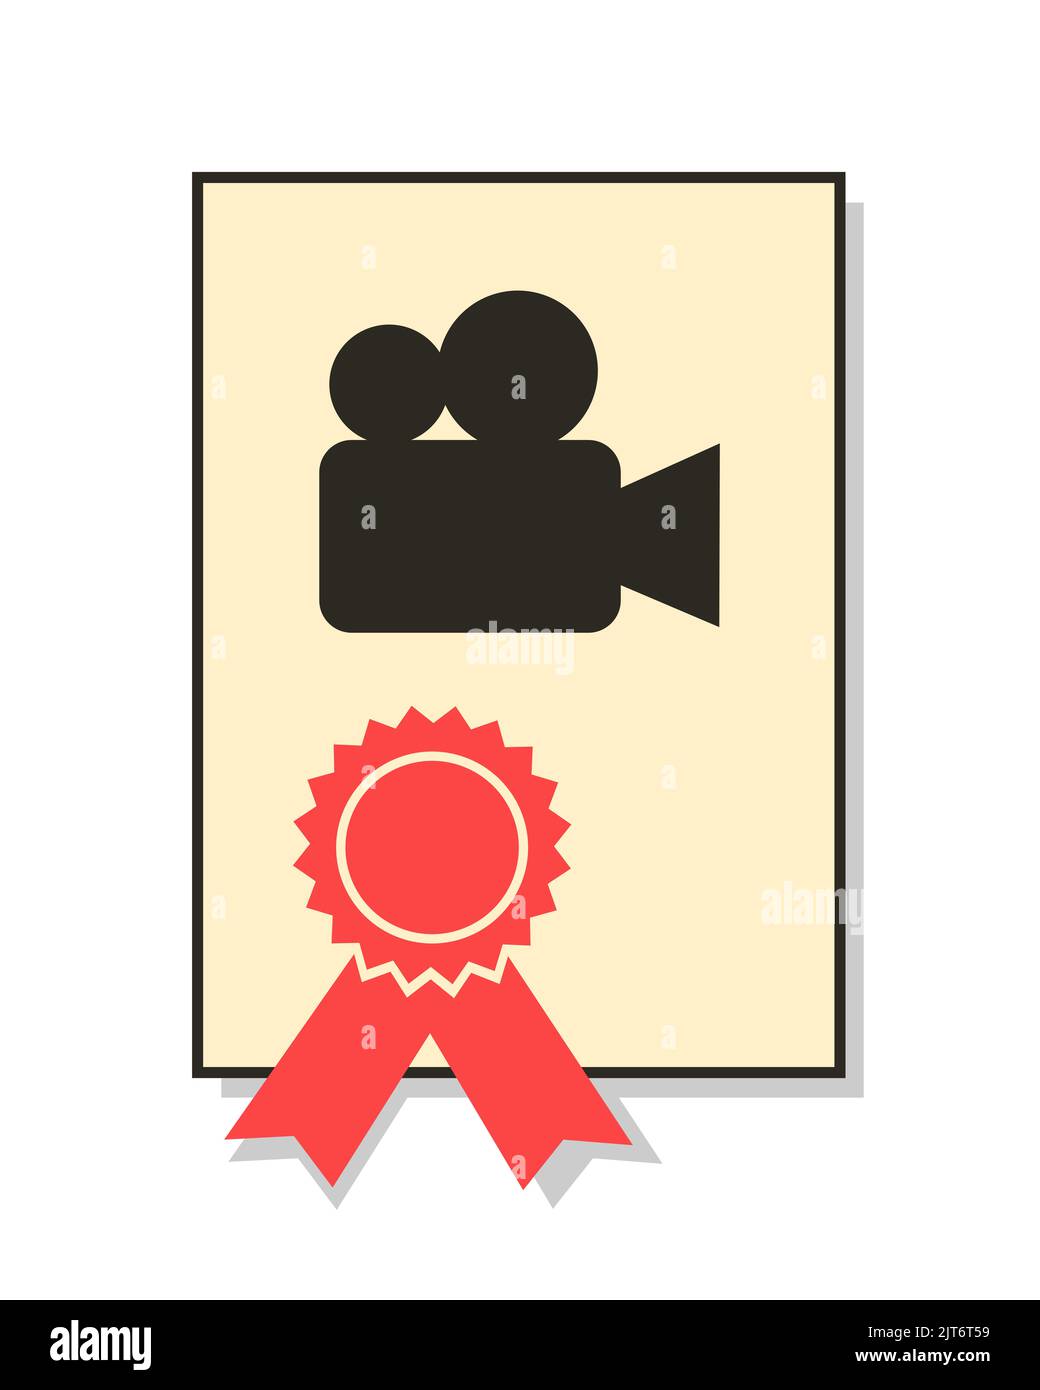 Diploma and certificate from film school - official certification of education, studium and skill in cinematography, motion picture, movie, cinema and Stock Photo